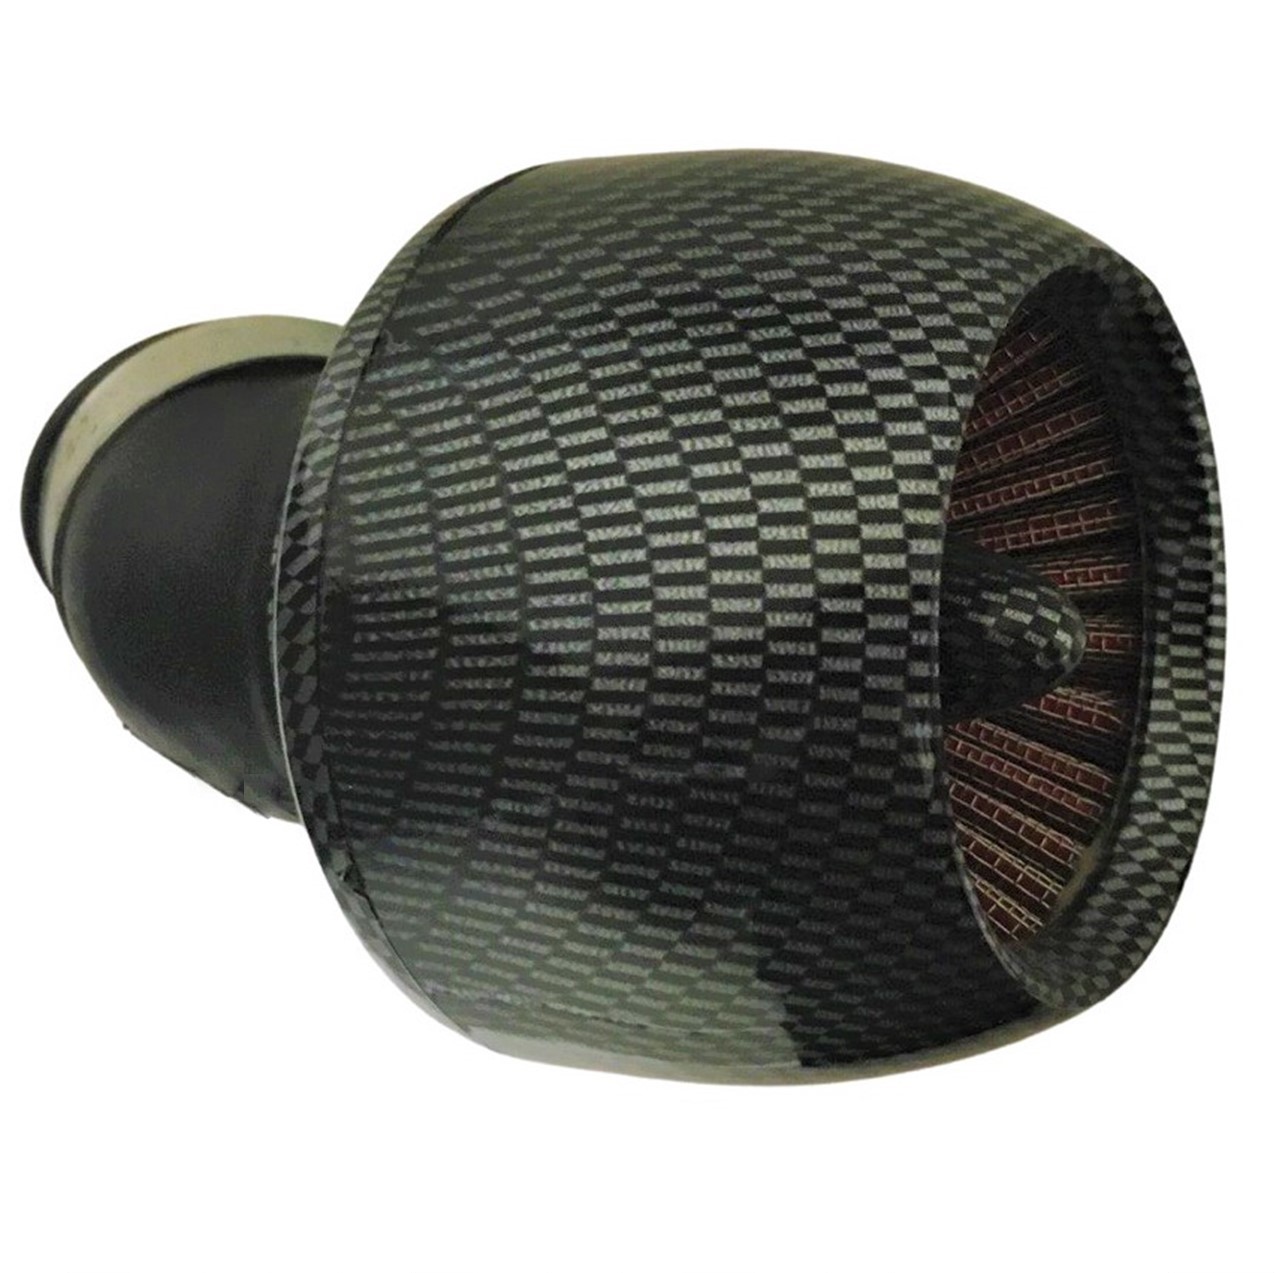 High Performance Carbon Graphite Air Filter ID=38mm Fits 49cc Scooters with PD18J Carburetors